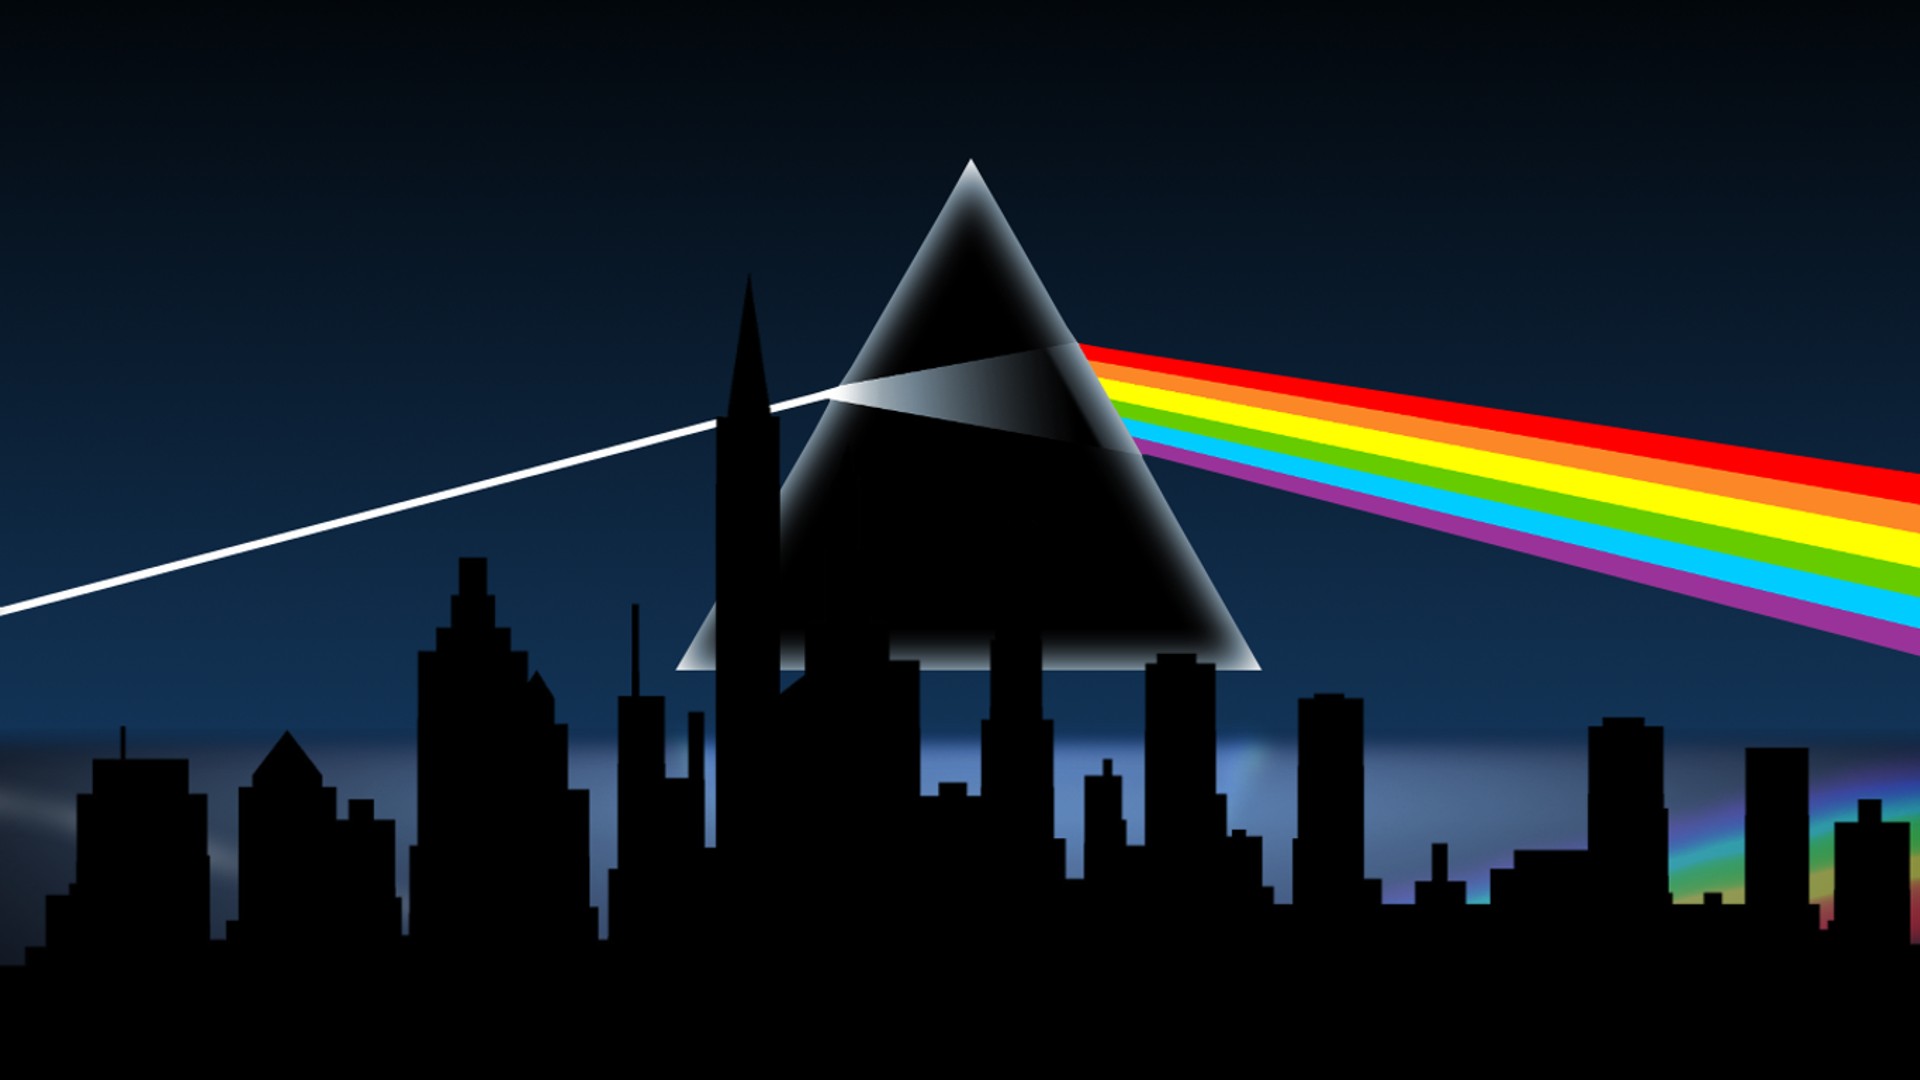 Pink Floyd, Album covers Wallpapers HD / Desktop and Mobile Backgrounds